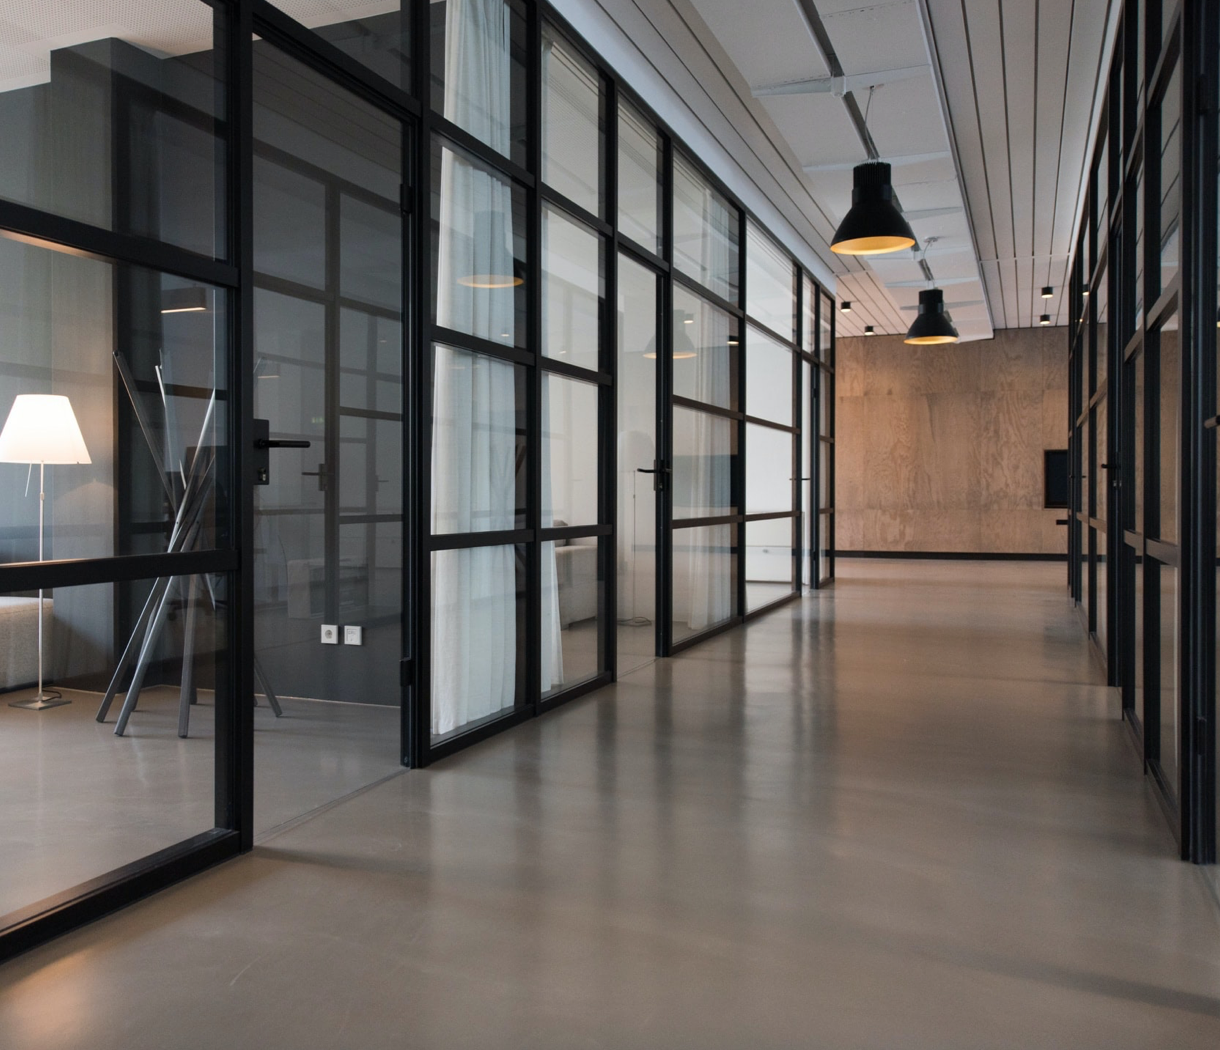 A corridor in a modern office building, with glassed walls on either side,